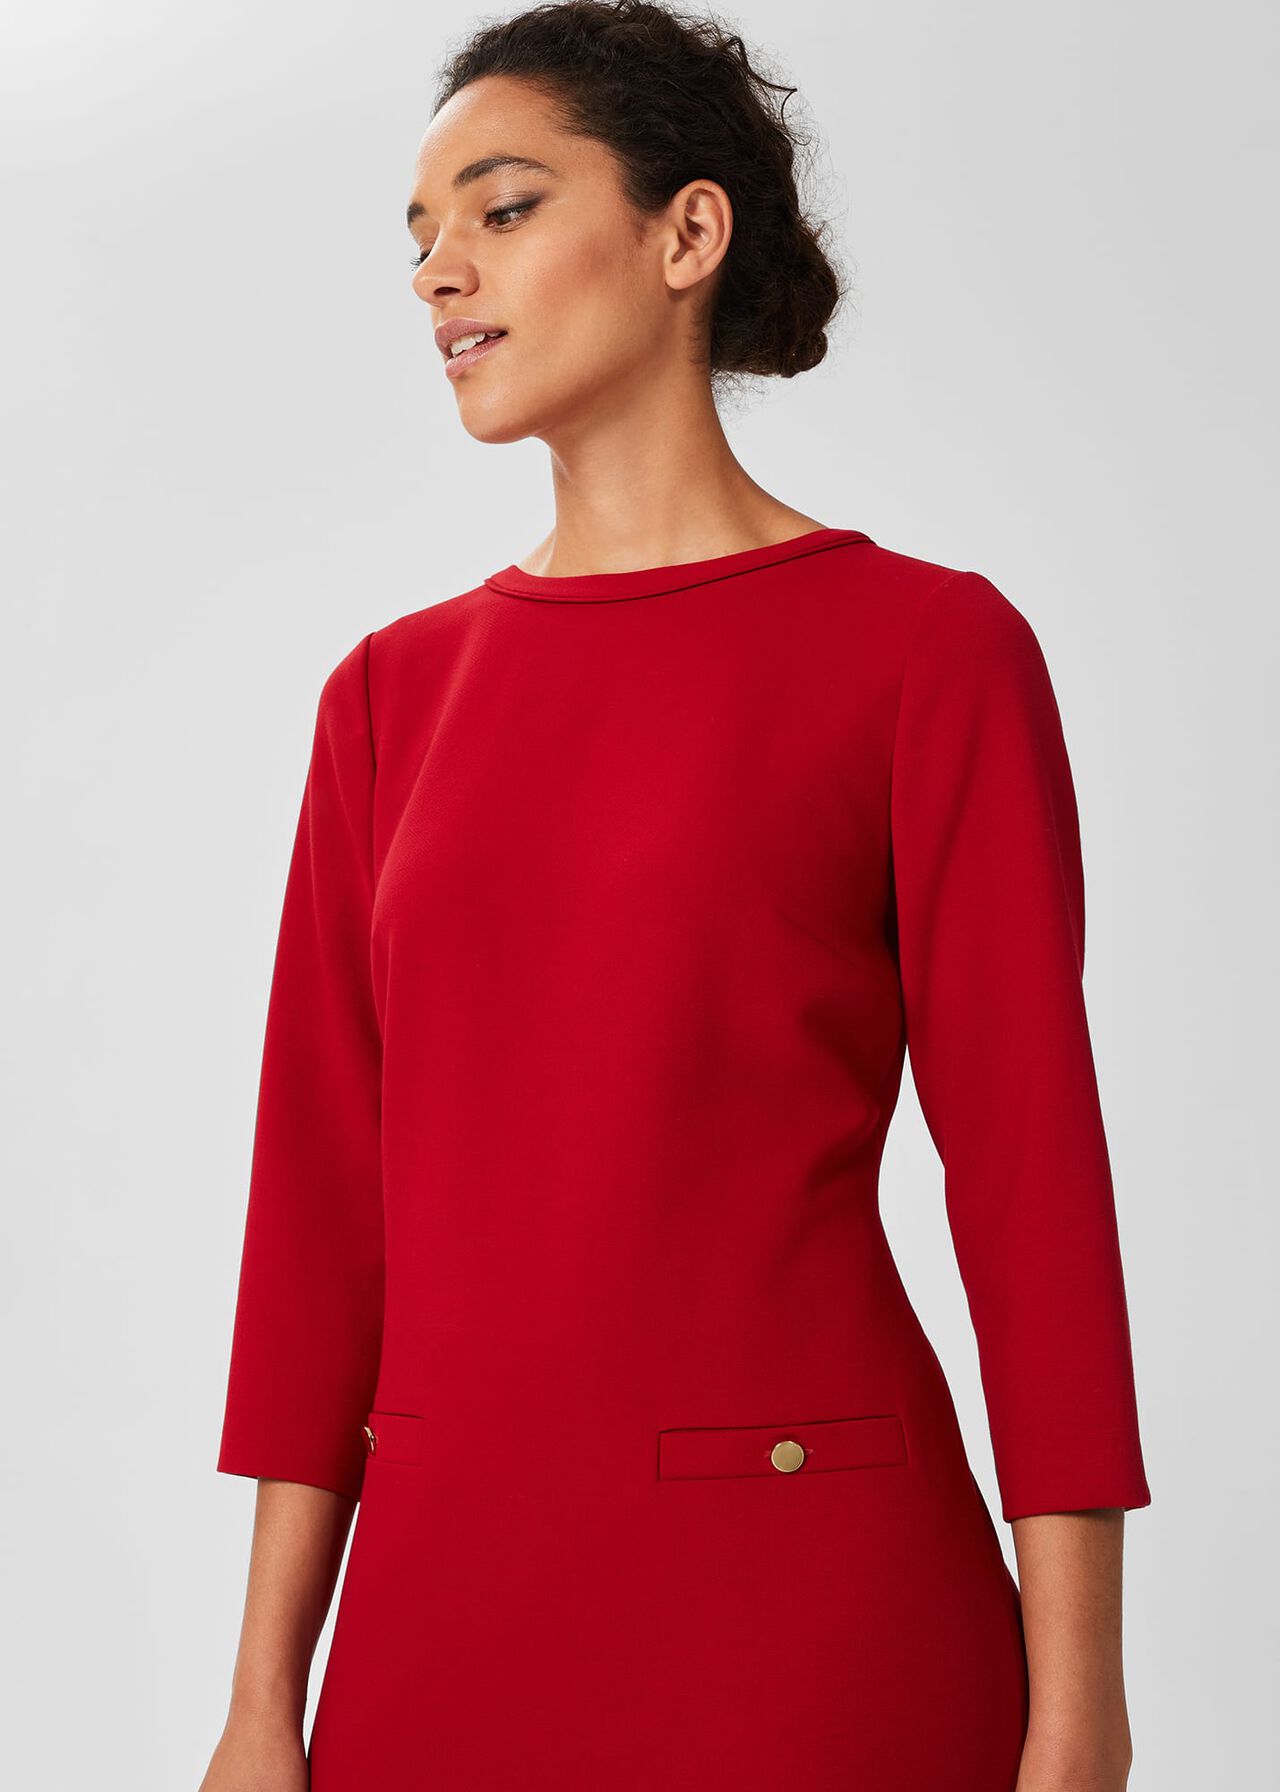 Petra Sleeved Dress, Cherry Red, hi-res